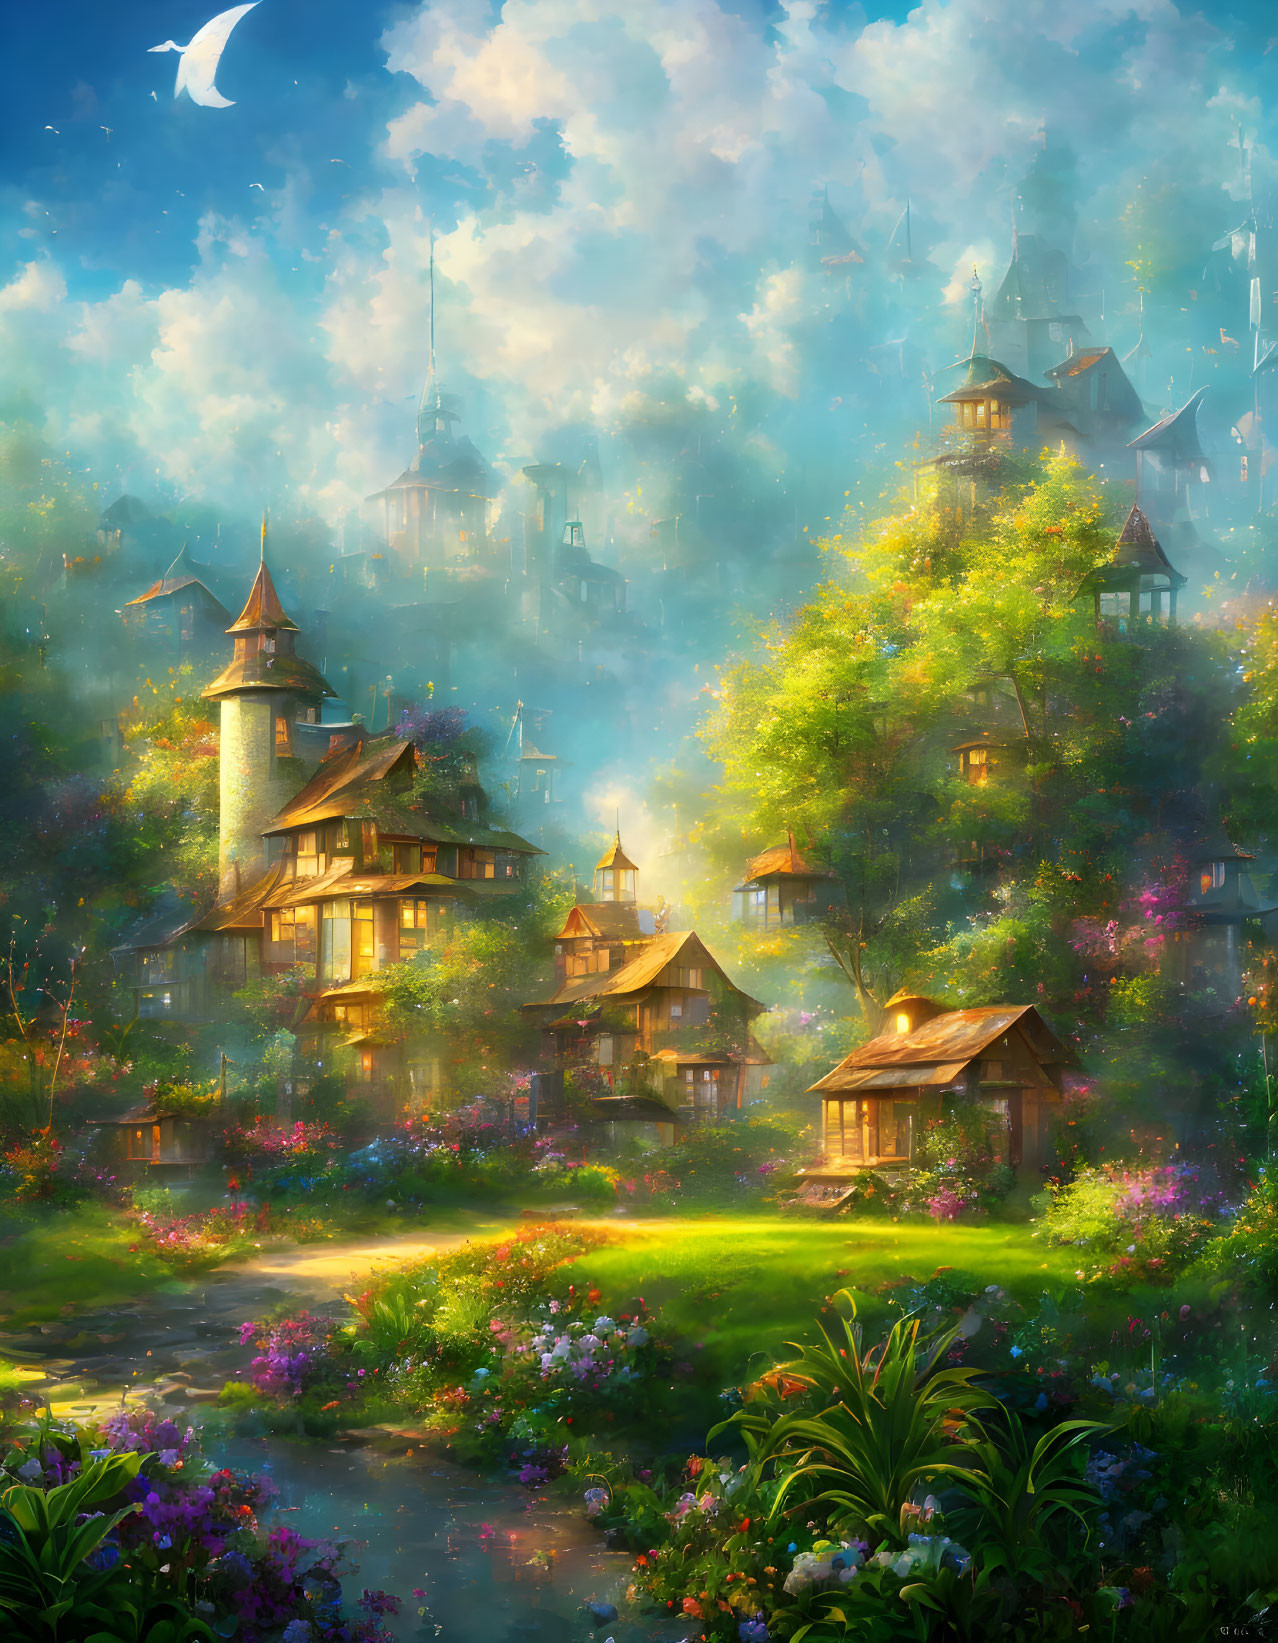 Fantastical village with rustic houses and lush greenery